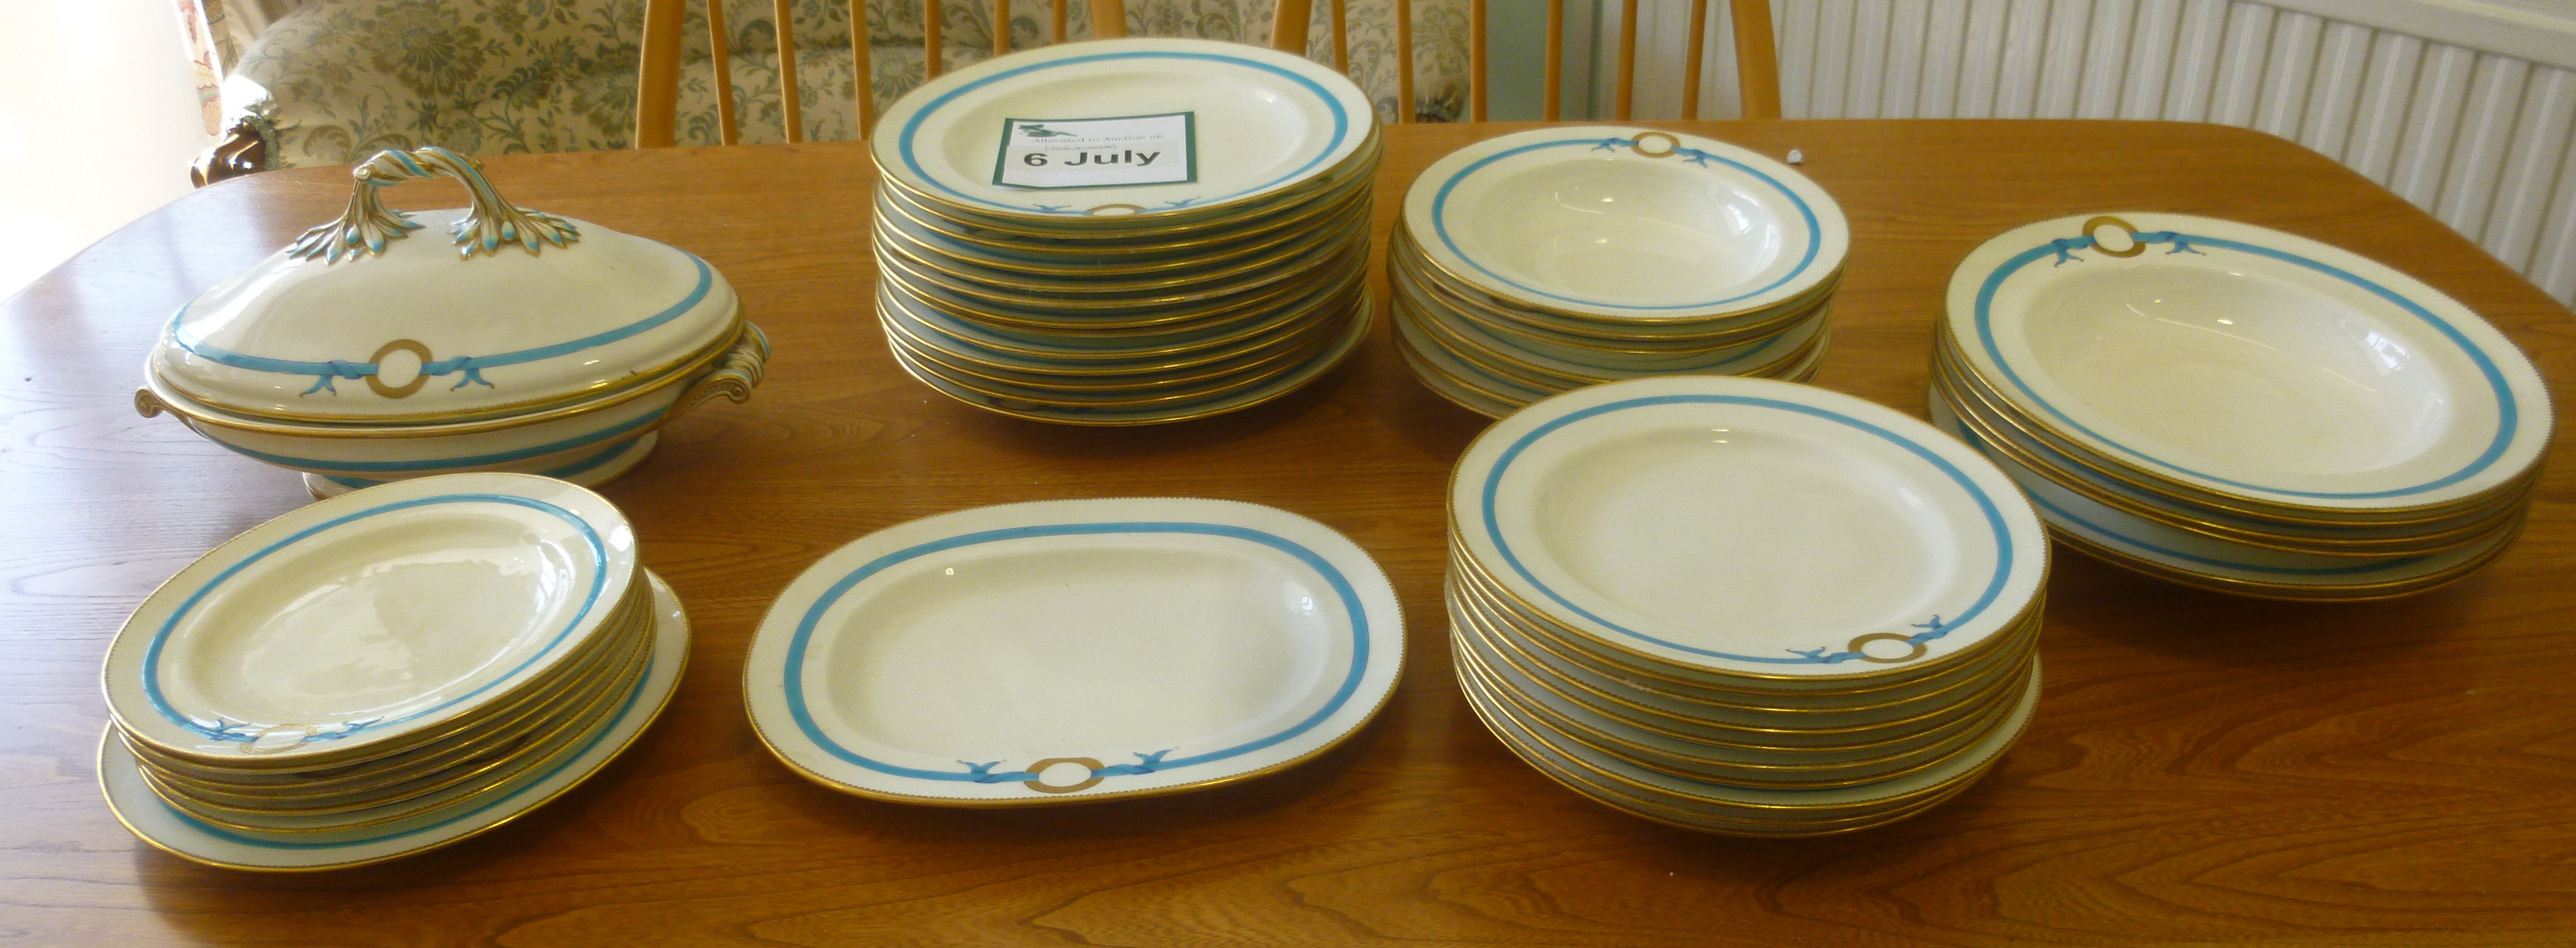 Late Victorian Minton ivory glazed china tableware, the borders decorated with turquoise ribbons, - Image 2 of 7